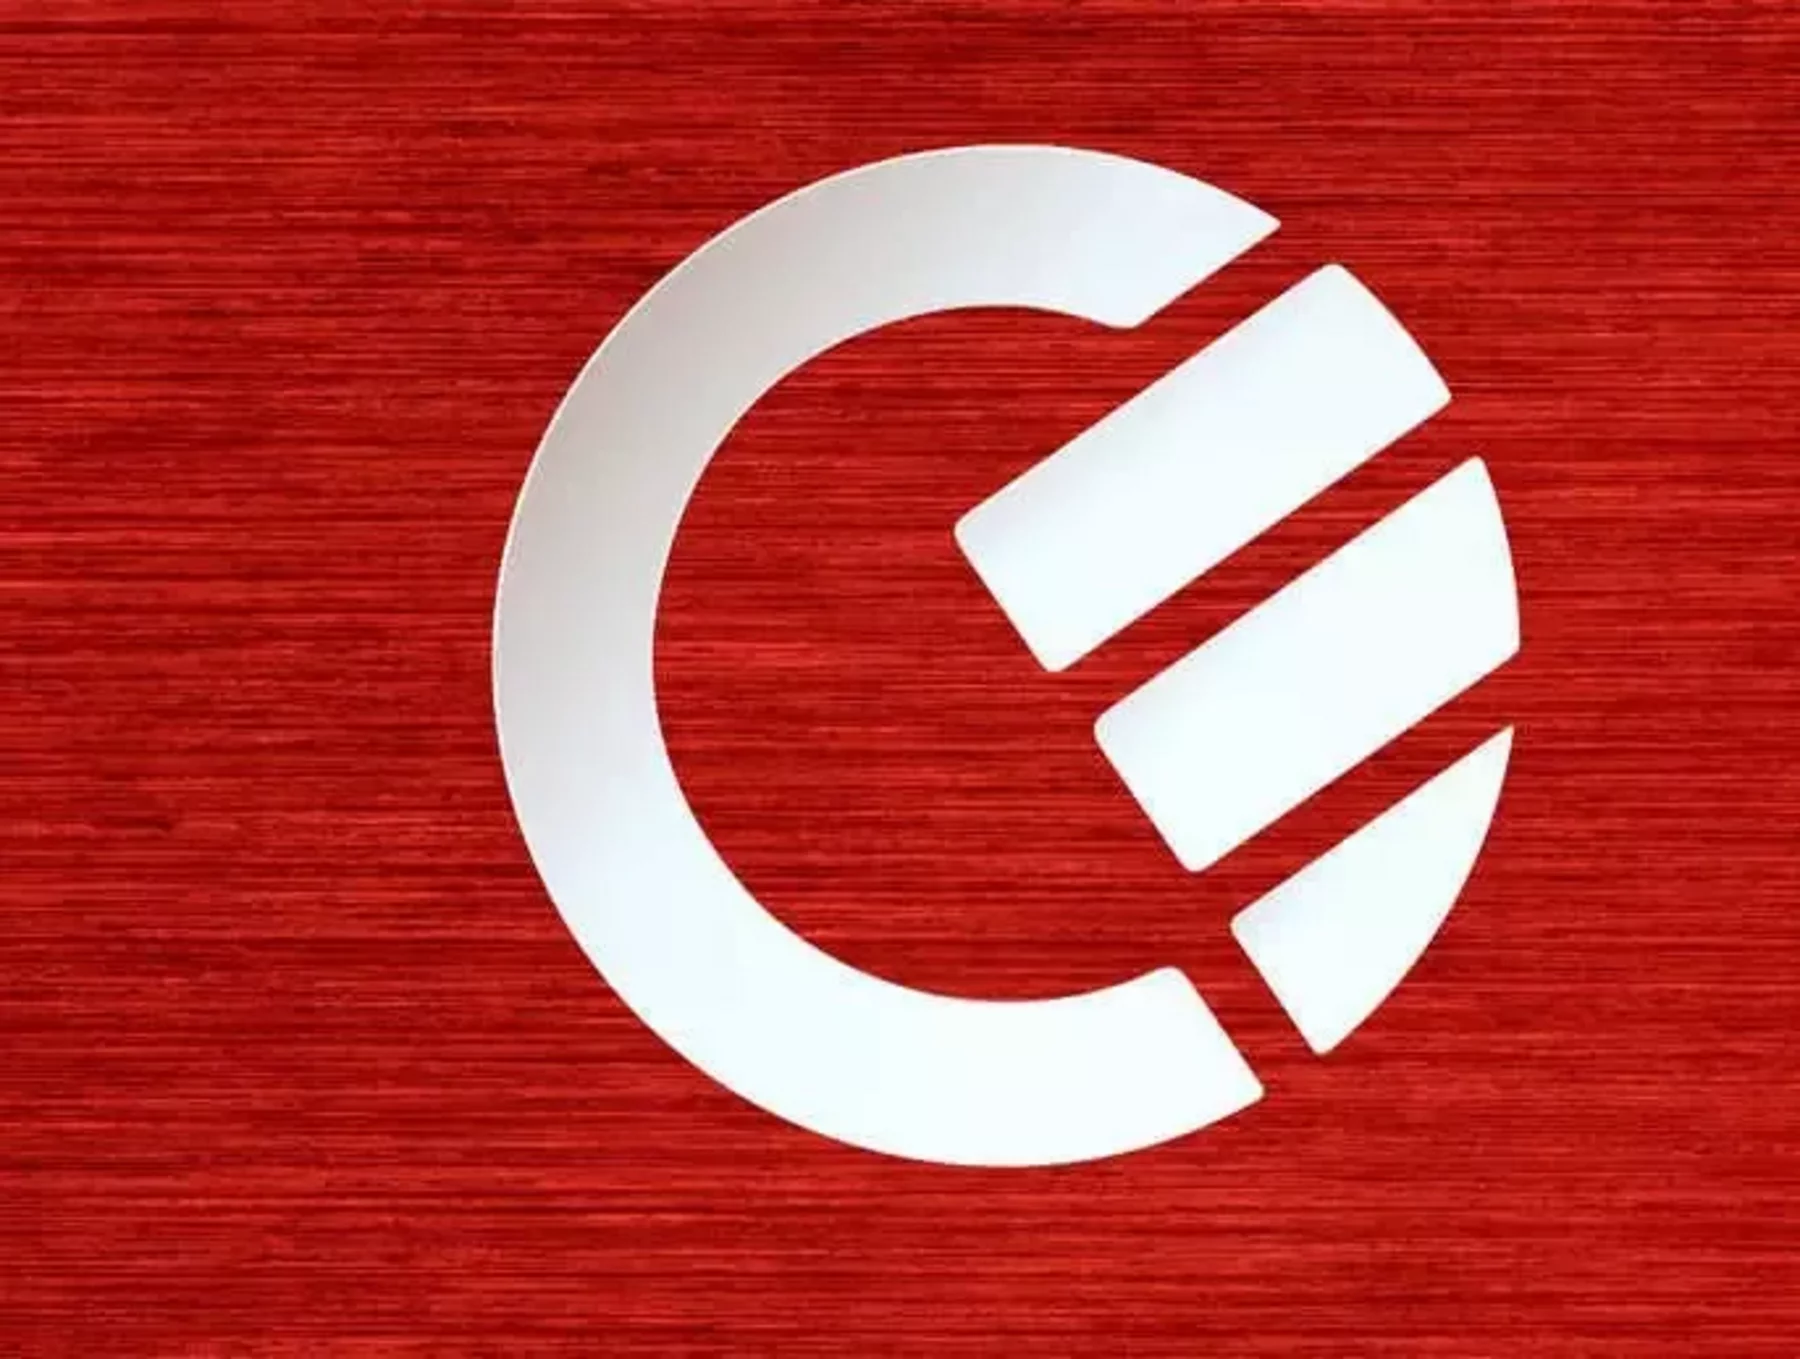 red logo with a curve